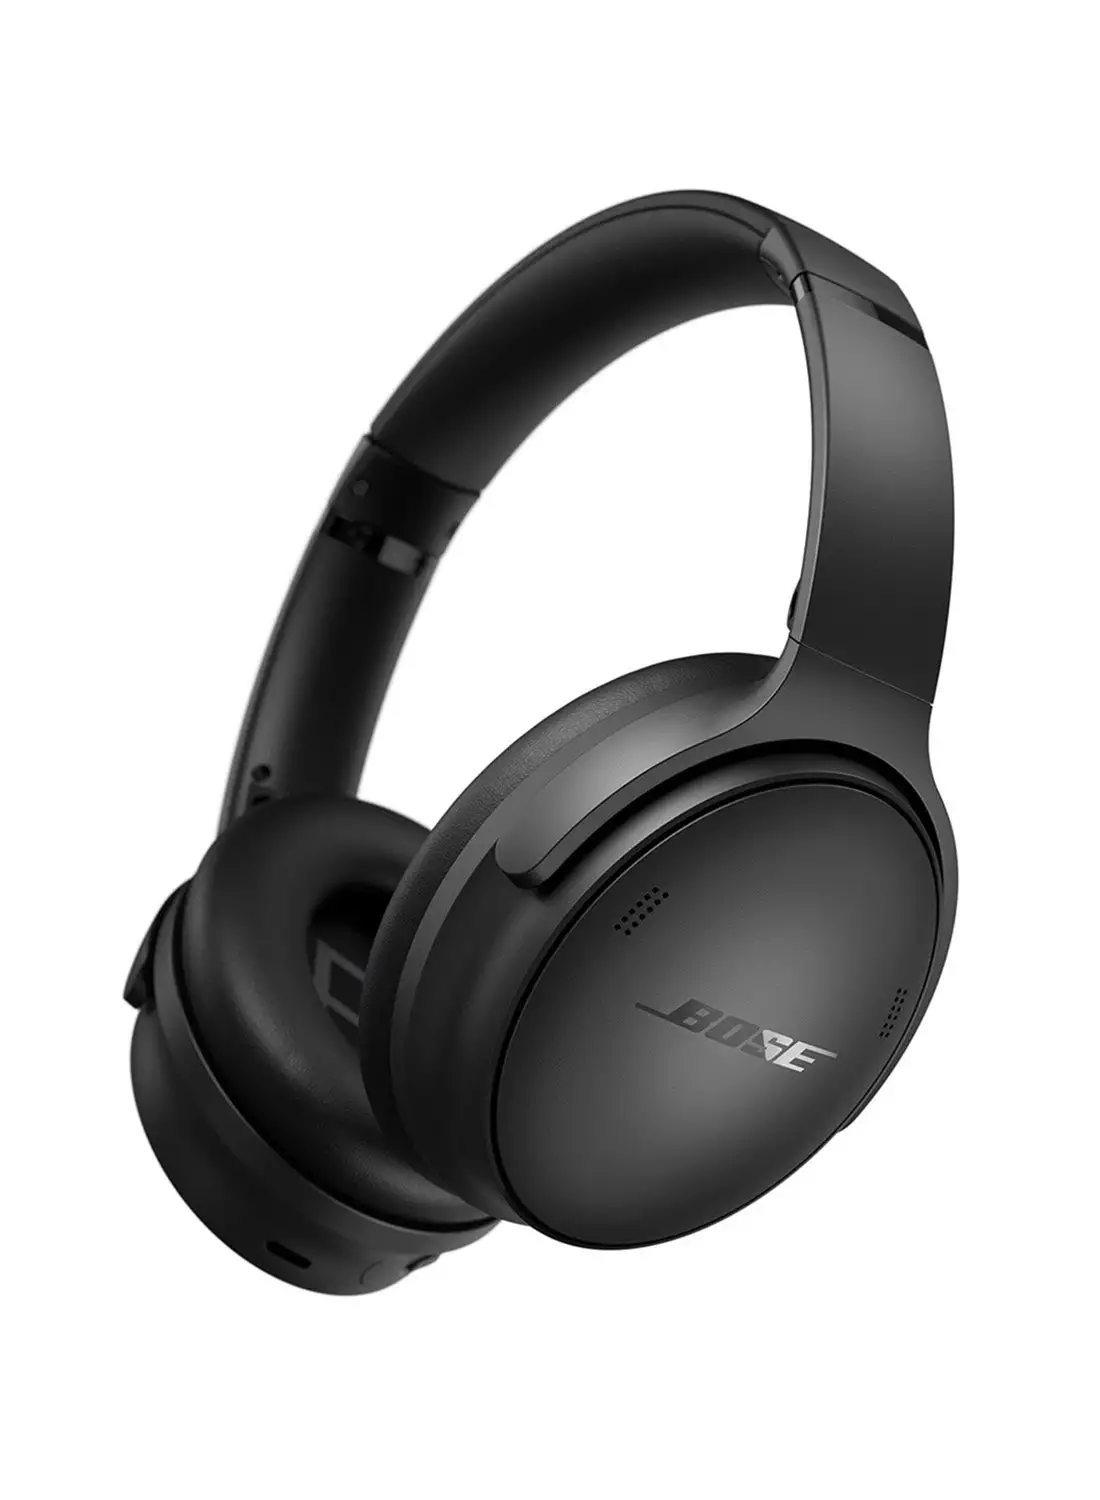 BOSE QuietComfort Wireless Noise Cancelling Headphones Bluetooth Over Ear Headphones with Up To 24 Hours of Battery Life Black